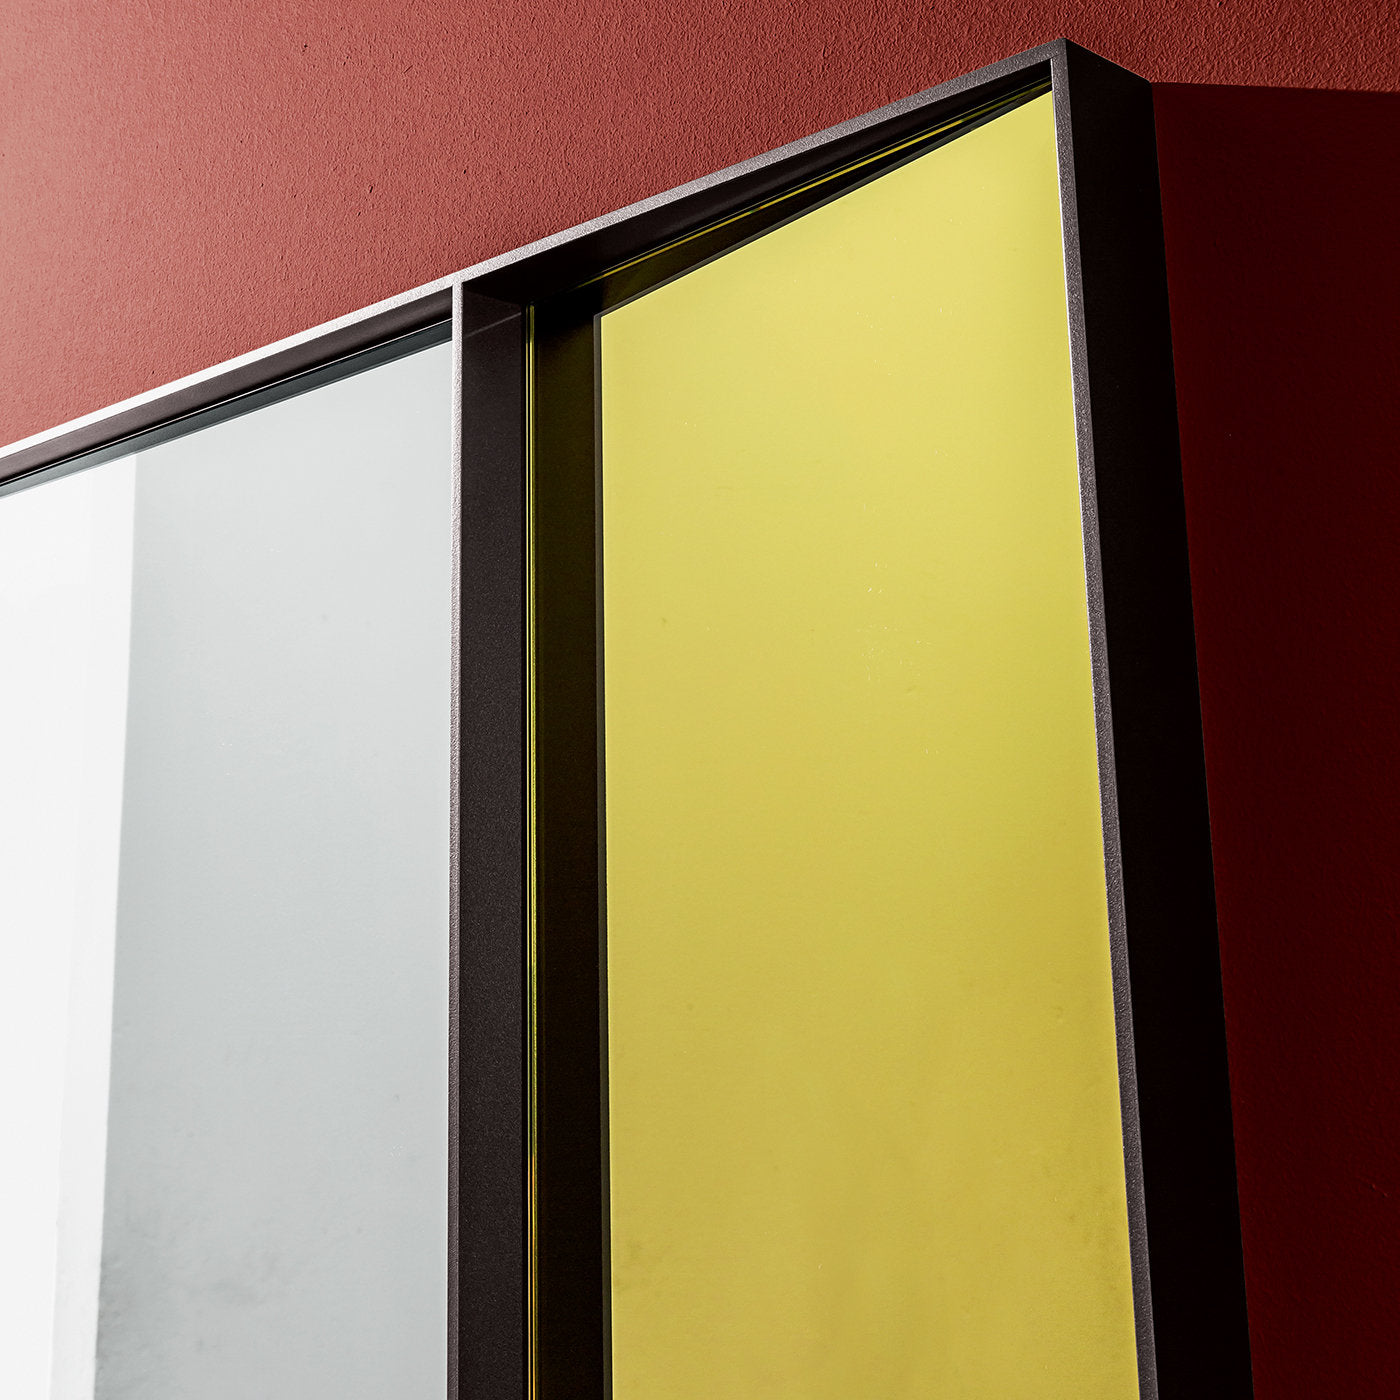 Campos Vertical Mirror in Extralight and Gold  - Alternative view 2